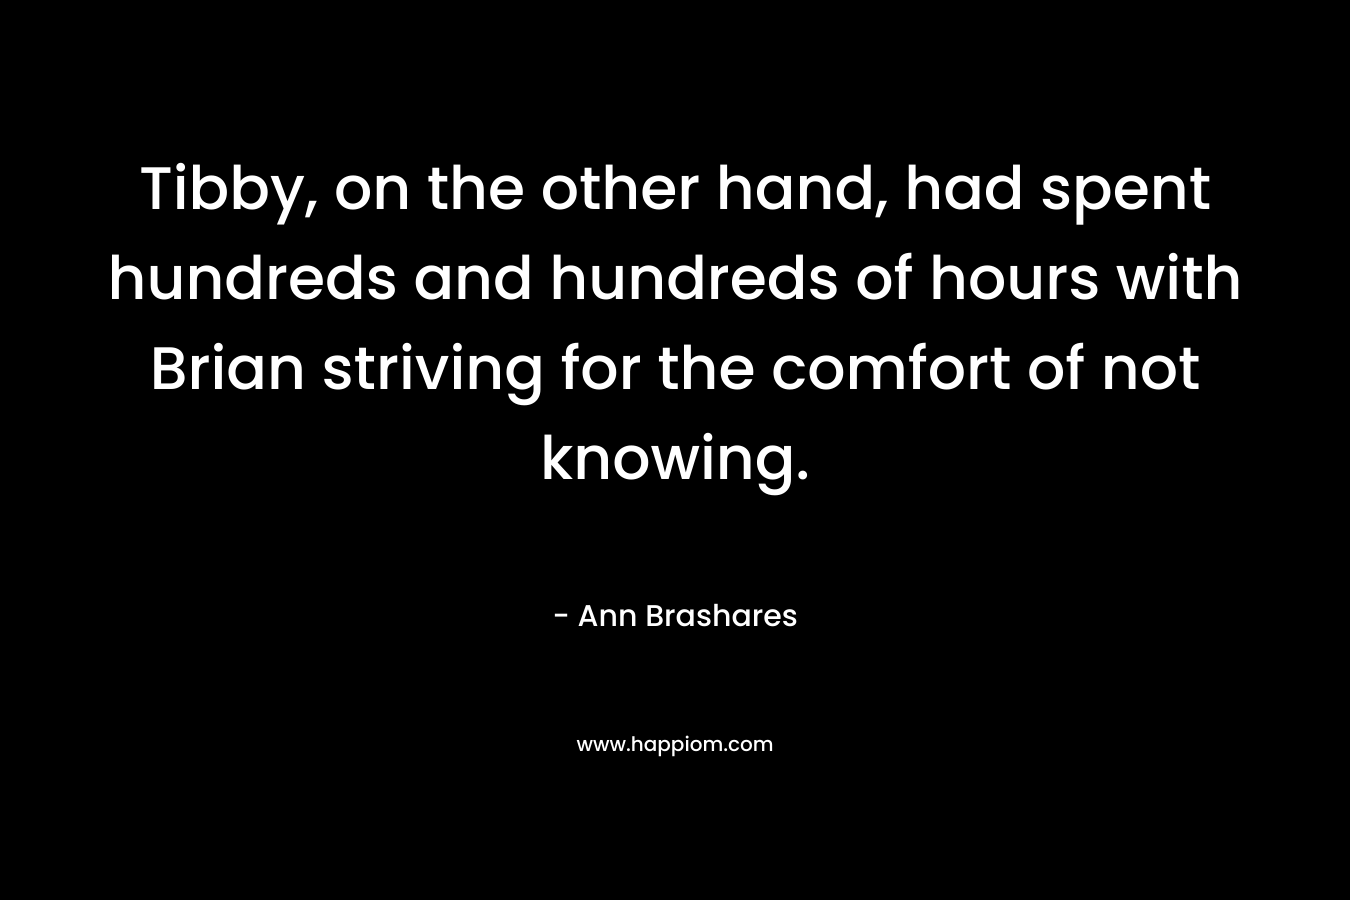 Tibby, on the other hand, had spent hundreds and hundreds of hours with Brian striving for the comfort of not knowing. – Ann Brashares